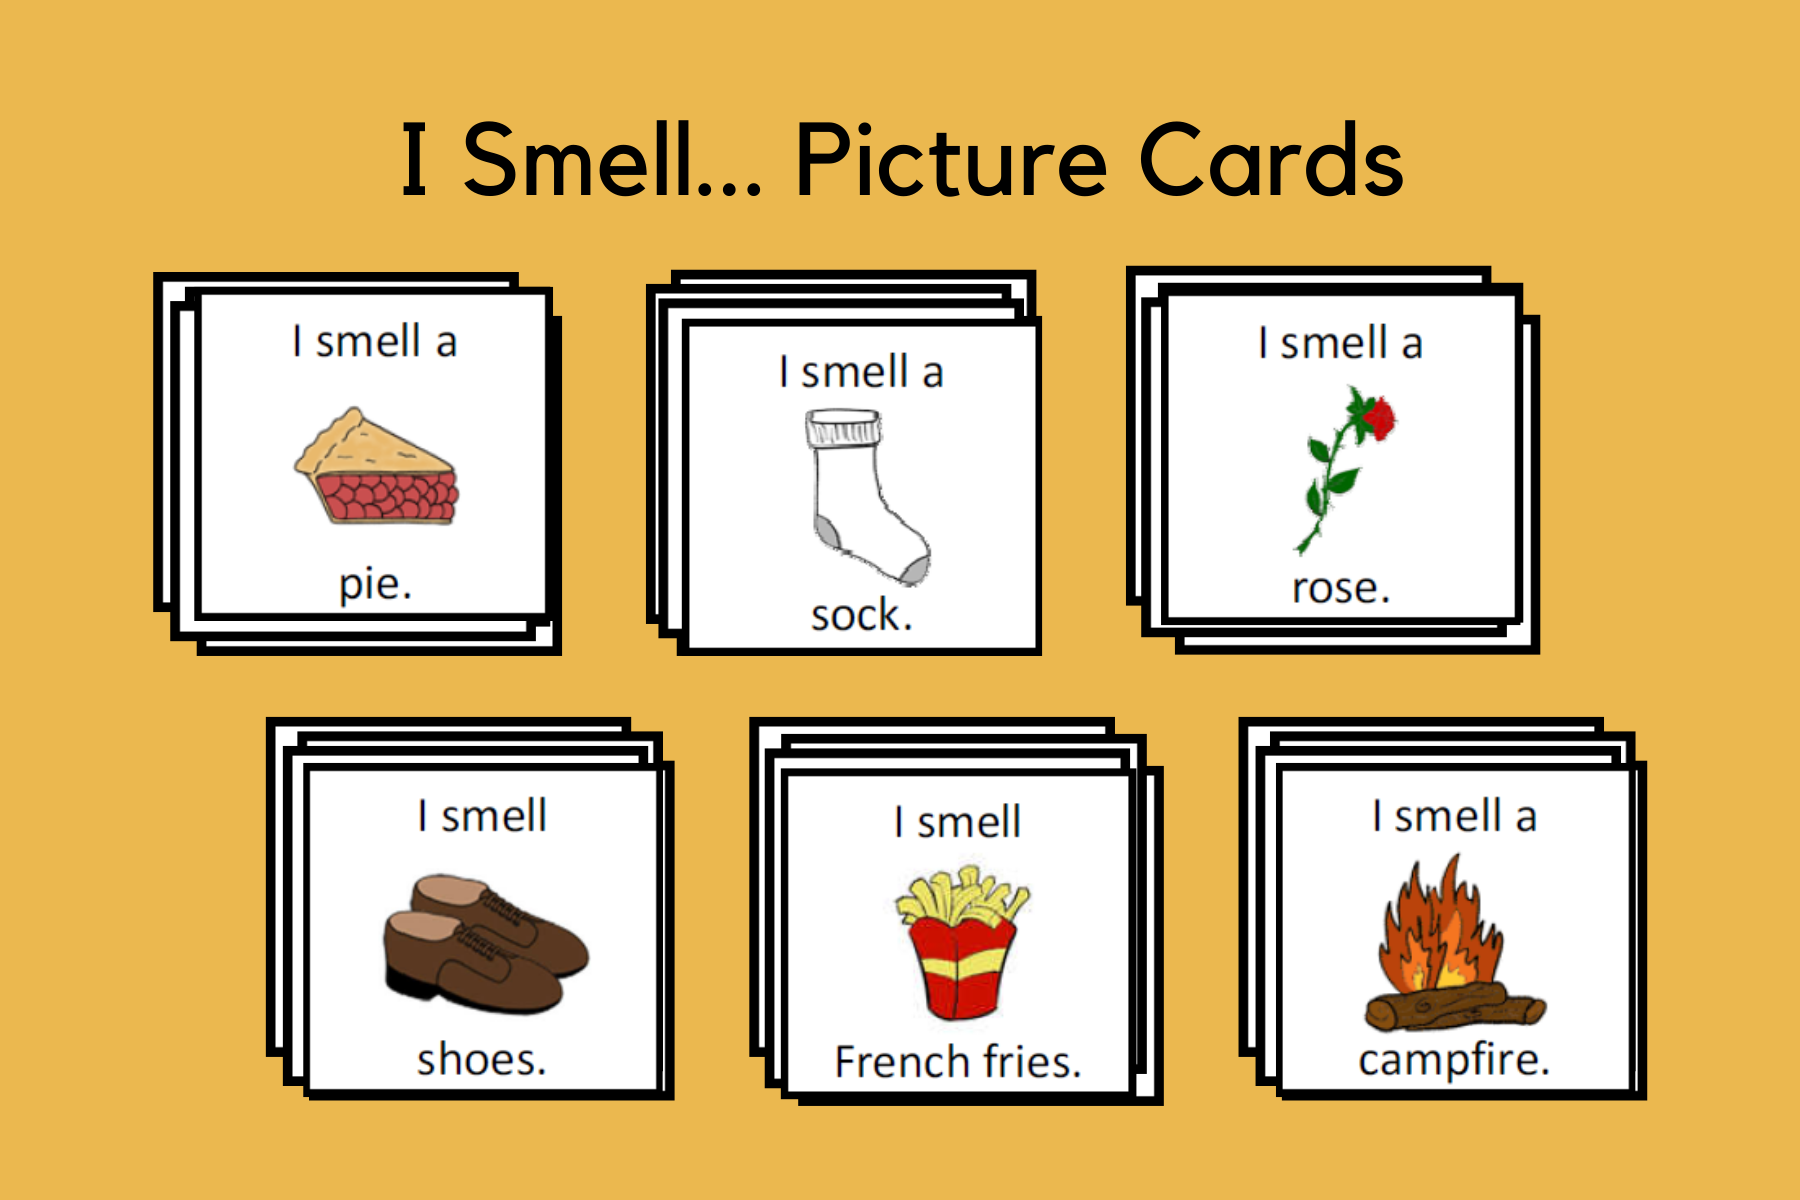 I Smell… Picture Cards